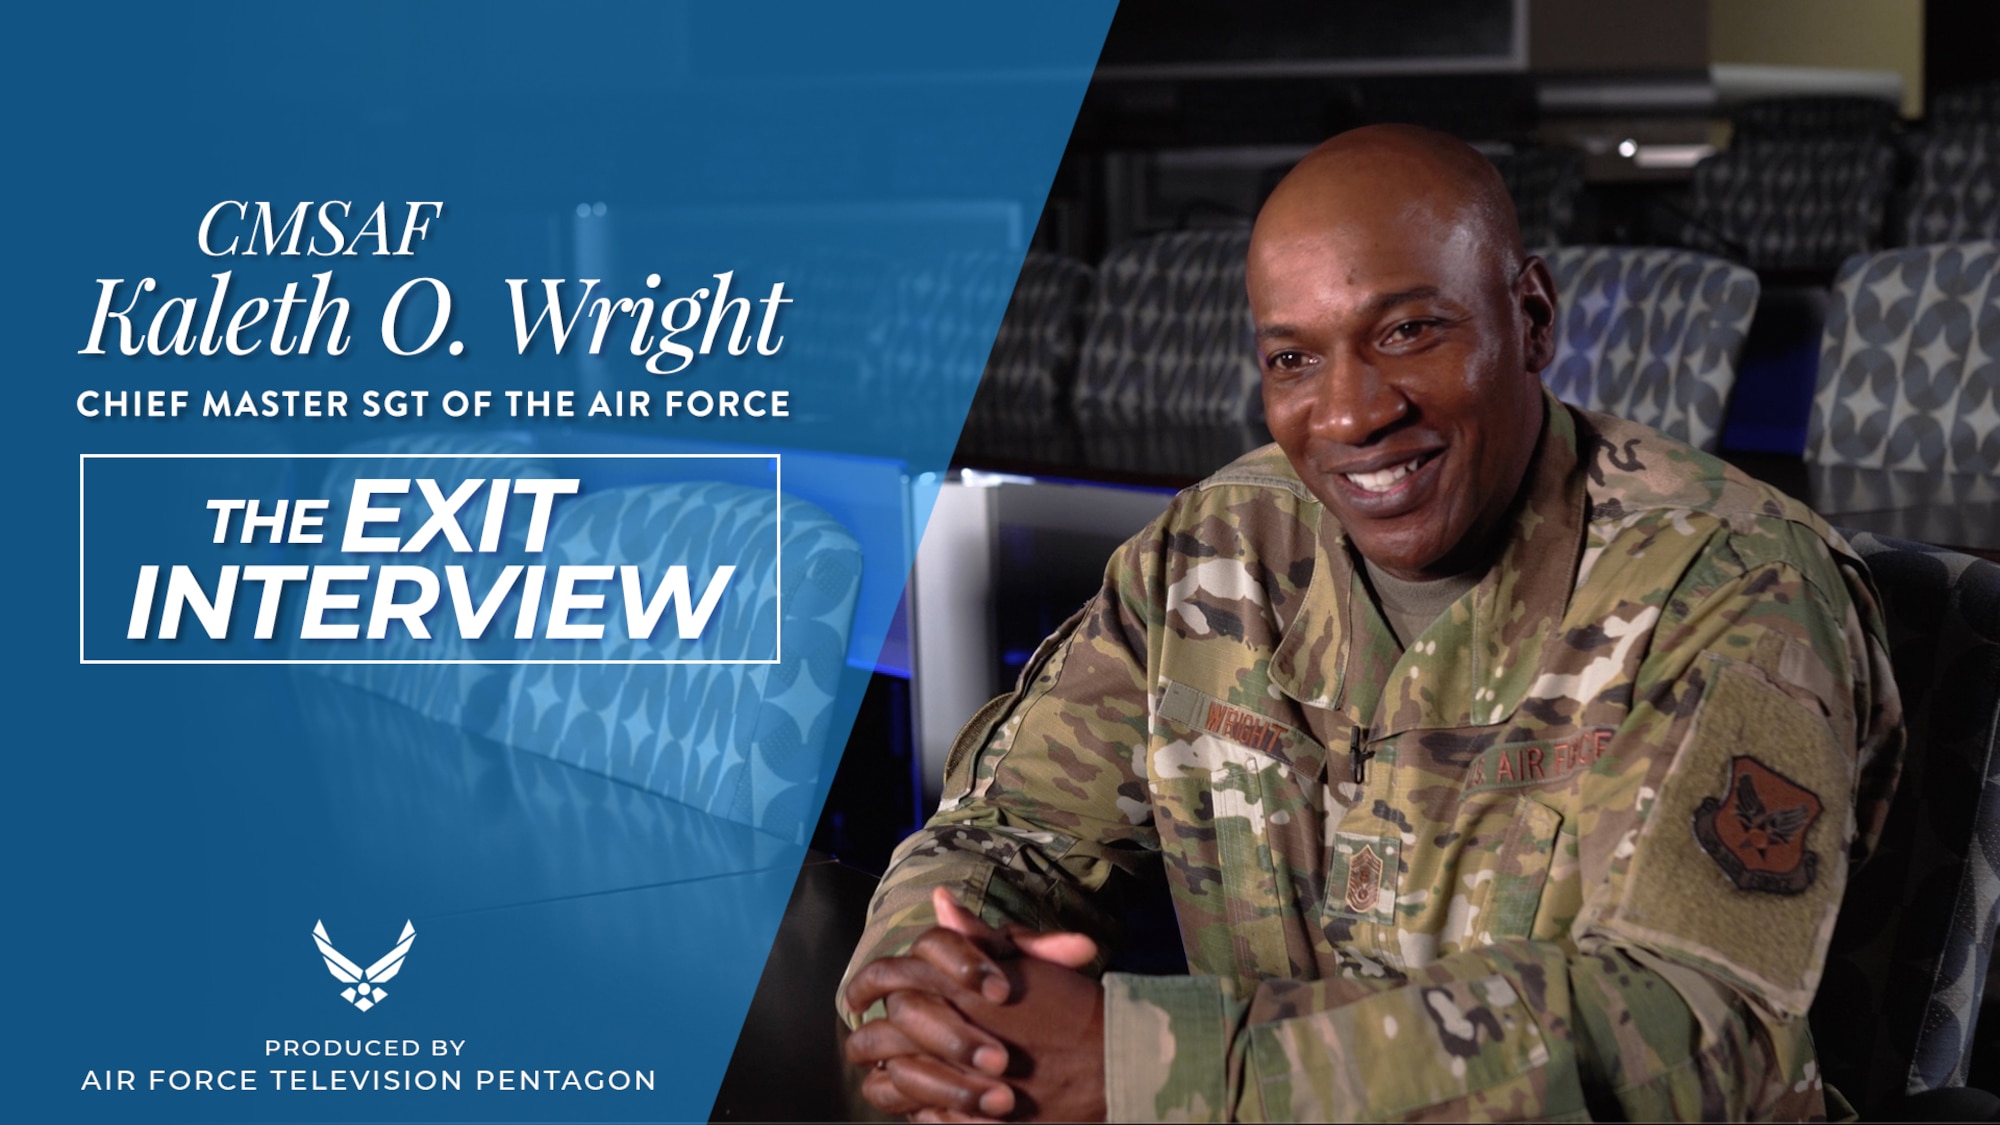 As he approaches retirement, CMSAF Wright examines his tenure as CMSAF